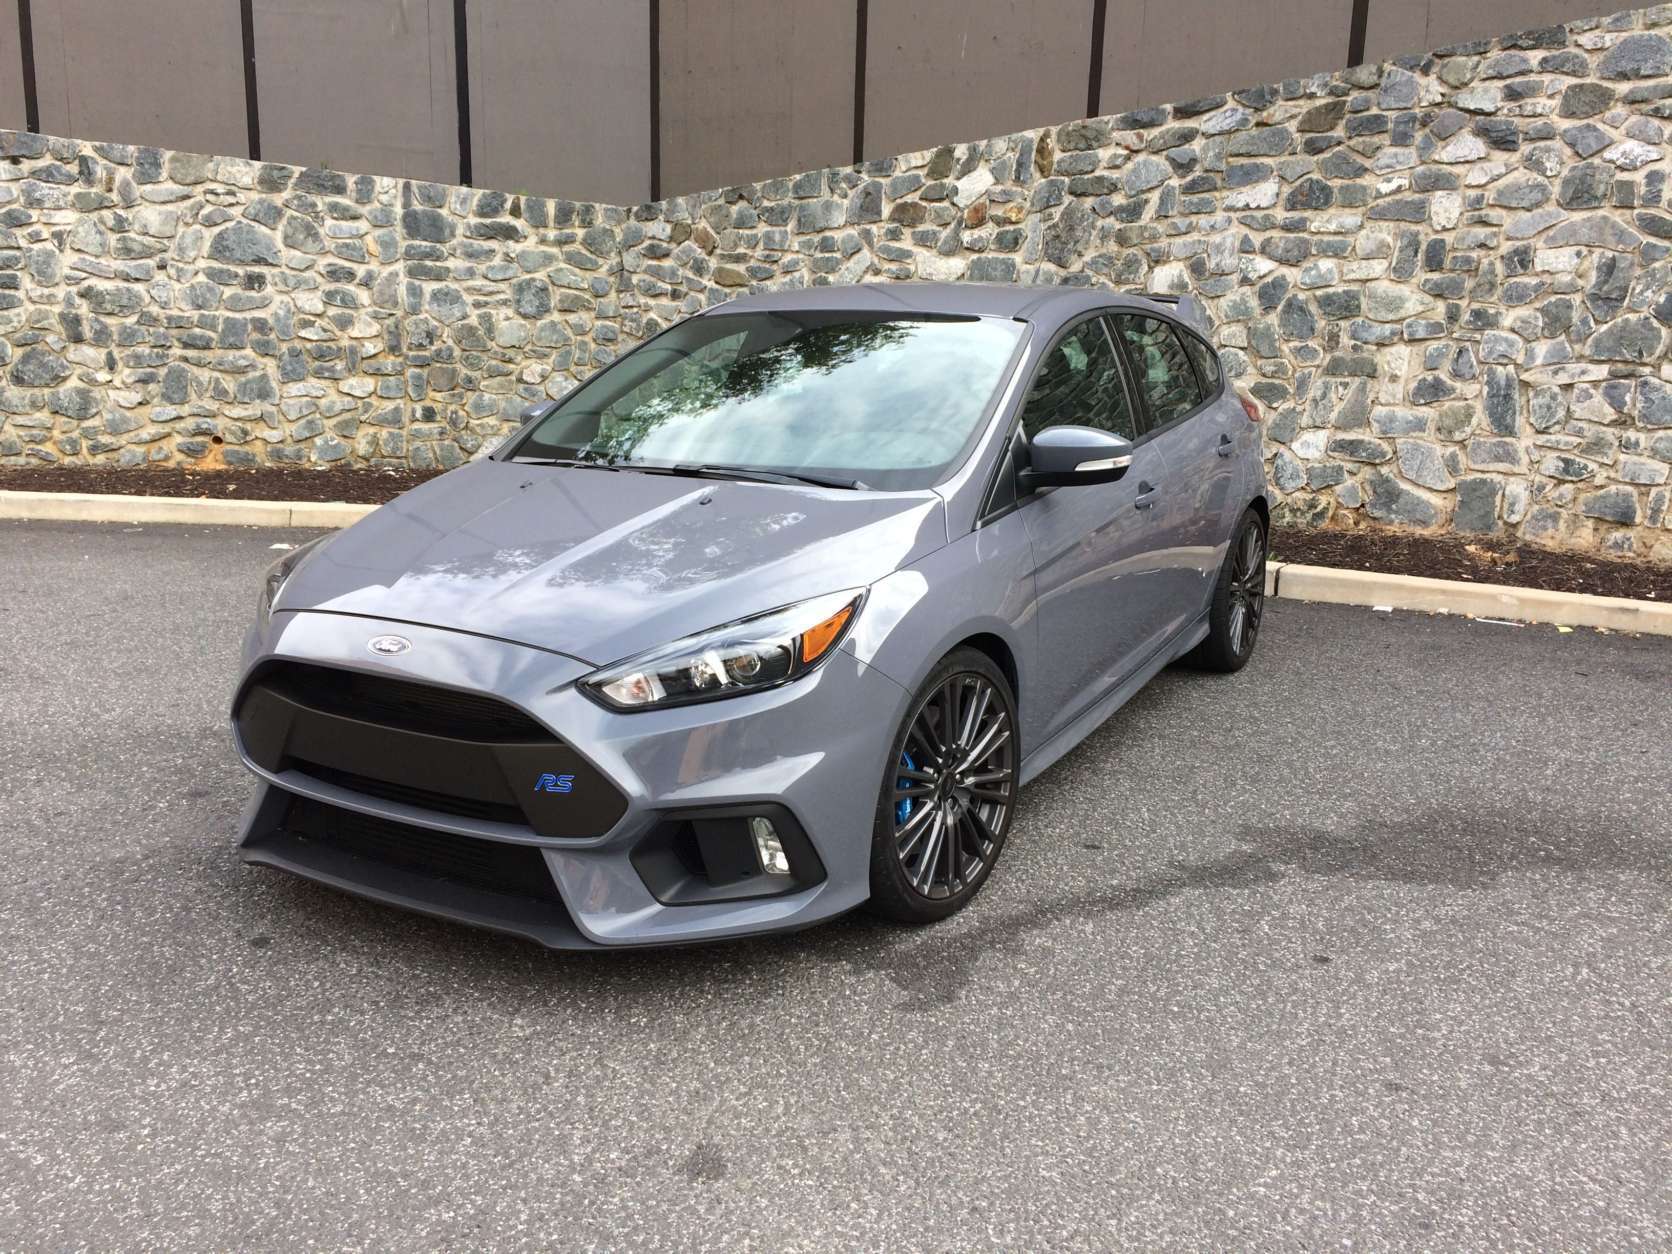 The Focus RS has a look that screams that it’s a hot hatch right from its unique and stand-out stealth gray color. There is a unique front grill that looks racy; the fog lights are placed into vents.  (WTOP/Mike Parris)